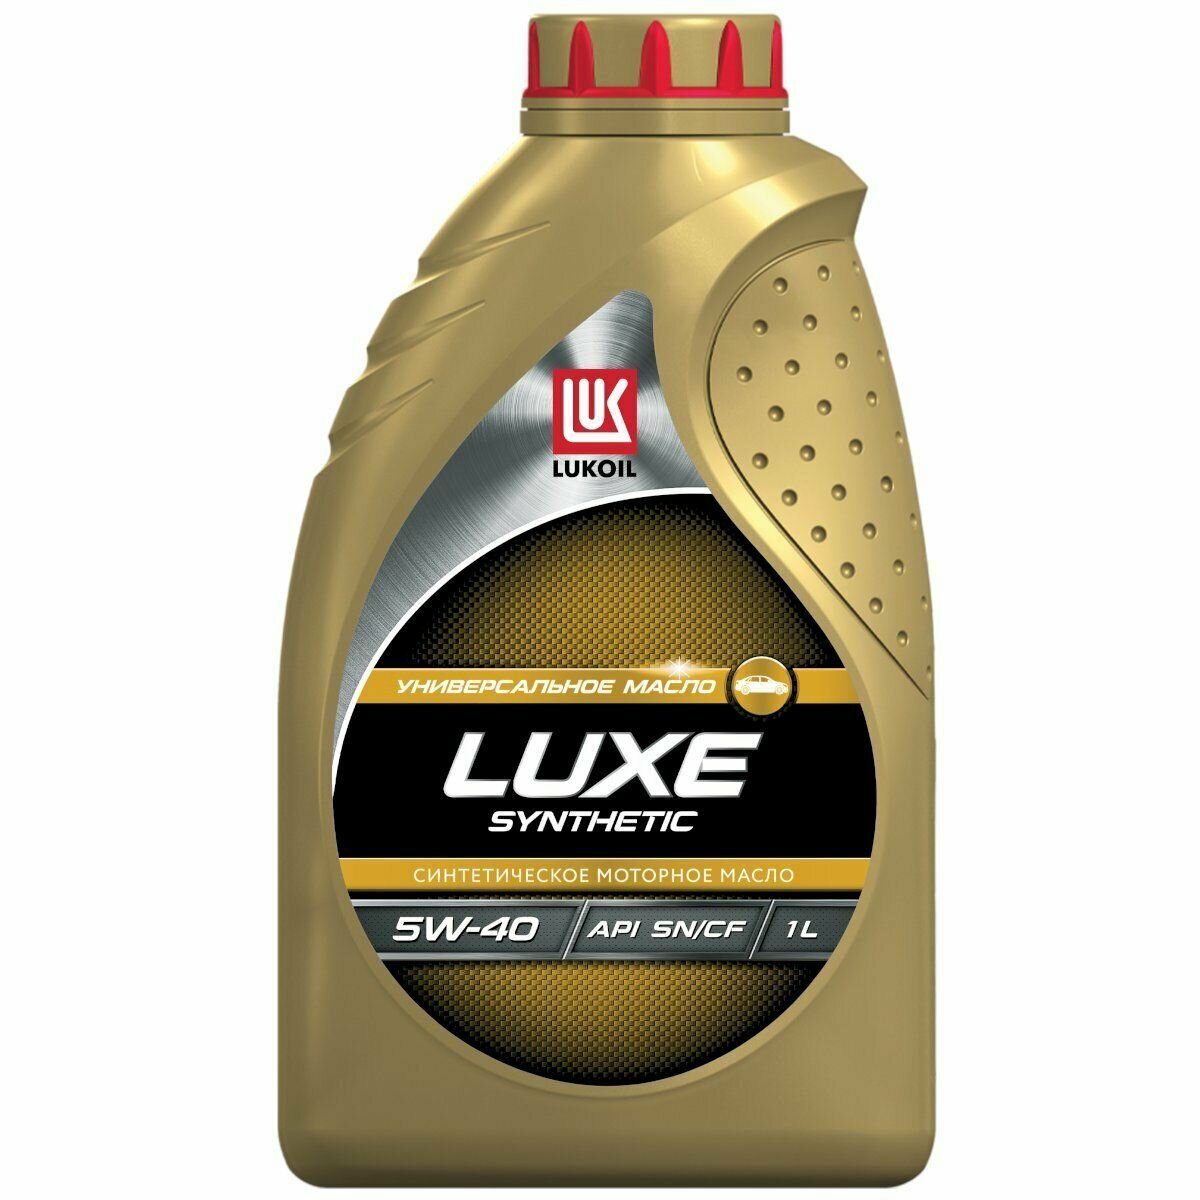 Масло моторное Лукойл LUXE SYNTHETIC 5W-40 SN/CF 1л (207464)